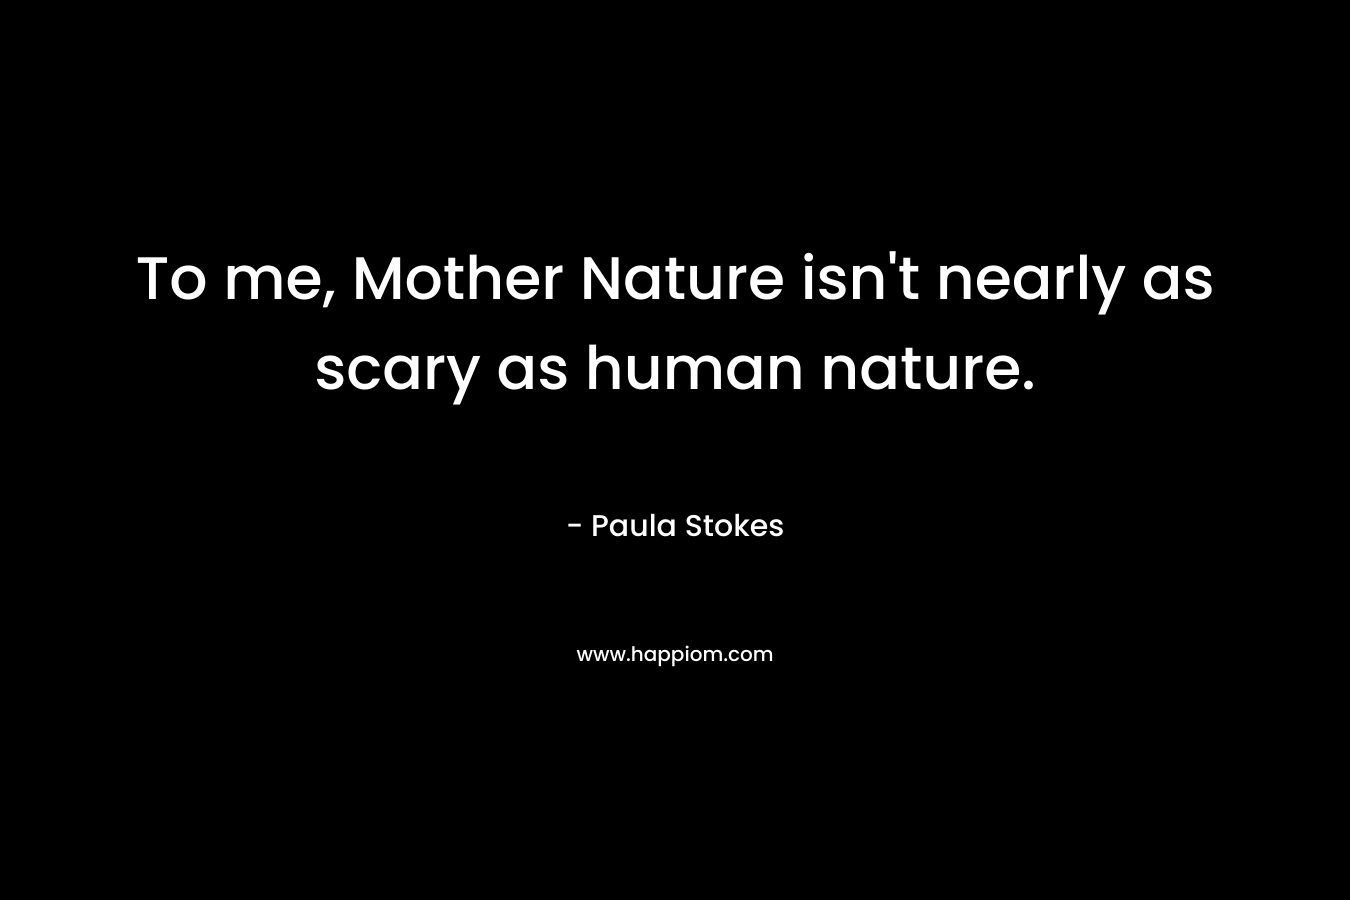 To me, Mother Nature isn’t nearly as scary as human nature. – Paula Stokes